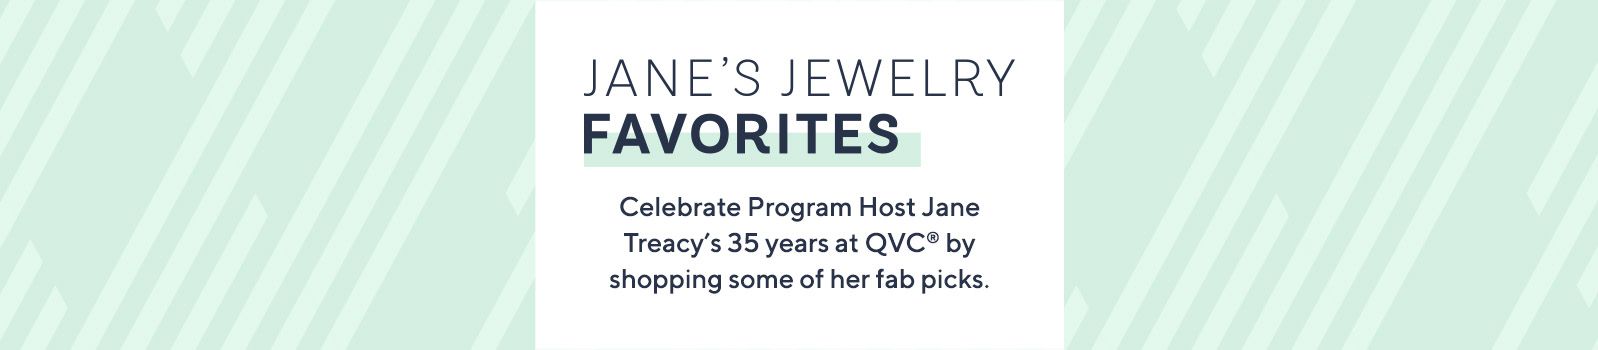 Jane's Jewelry Favorites.  Celebrate Program Host Jane Treacy's 35 years at QVC® by shopping some of her fab picks.